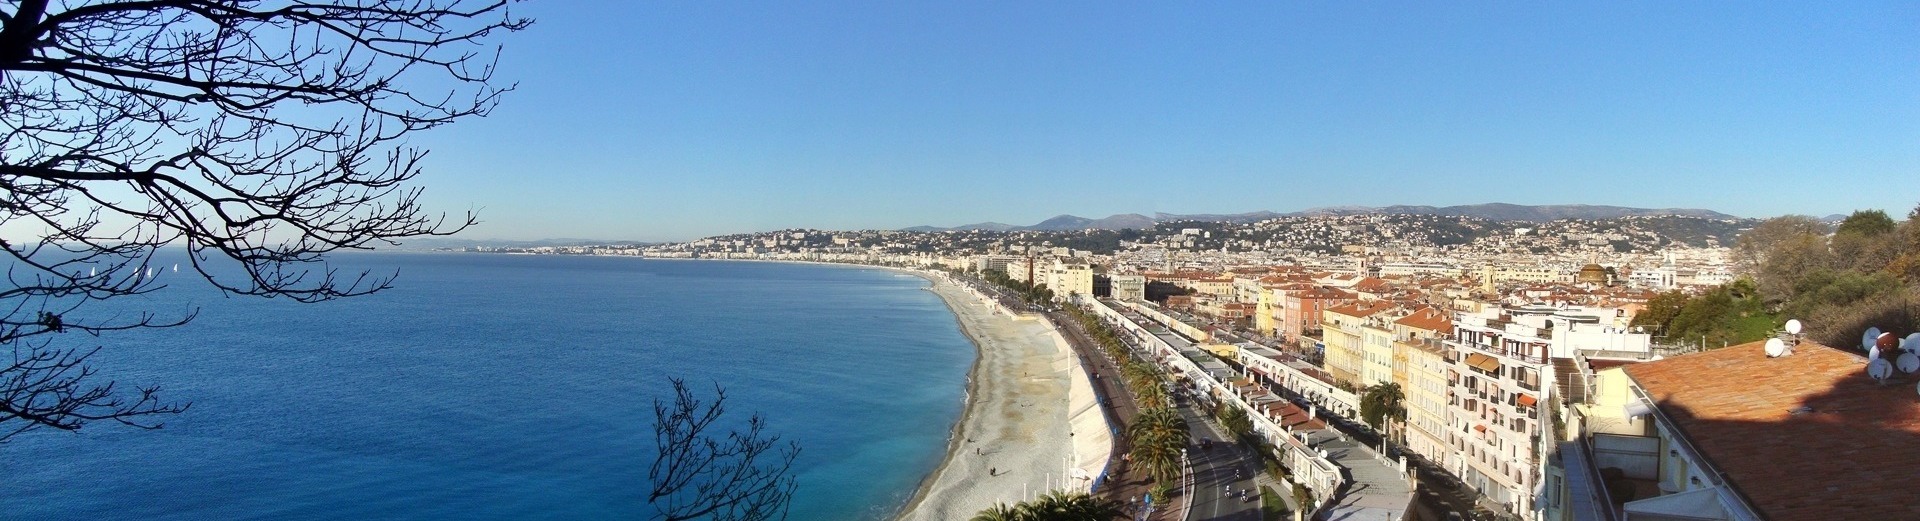 Panorama of Nice by Rafael Puerto (CC-BY)